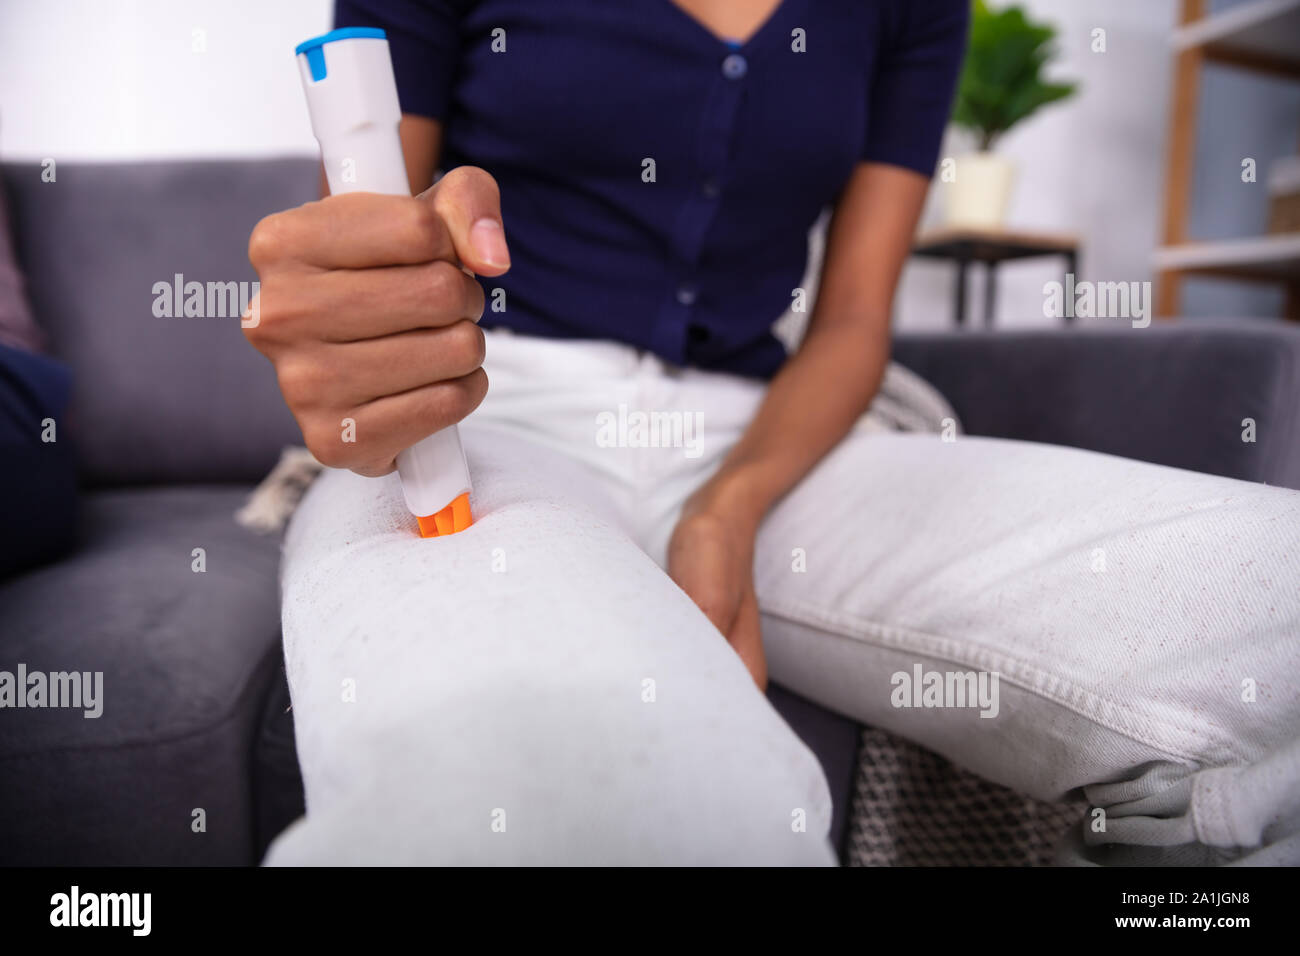 Woman Injecting Epinephrine Using Auto-injector Syringe As An Emergency Treatment For Allergic Reaction Stock Photo